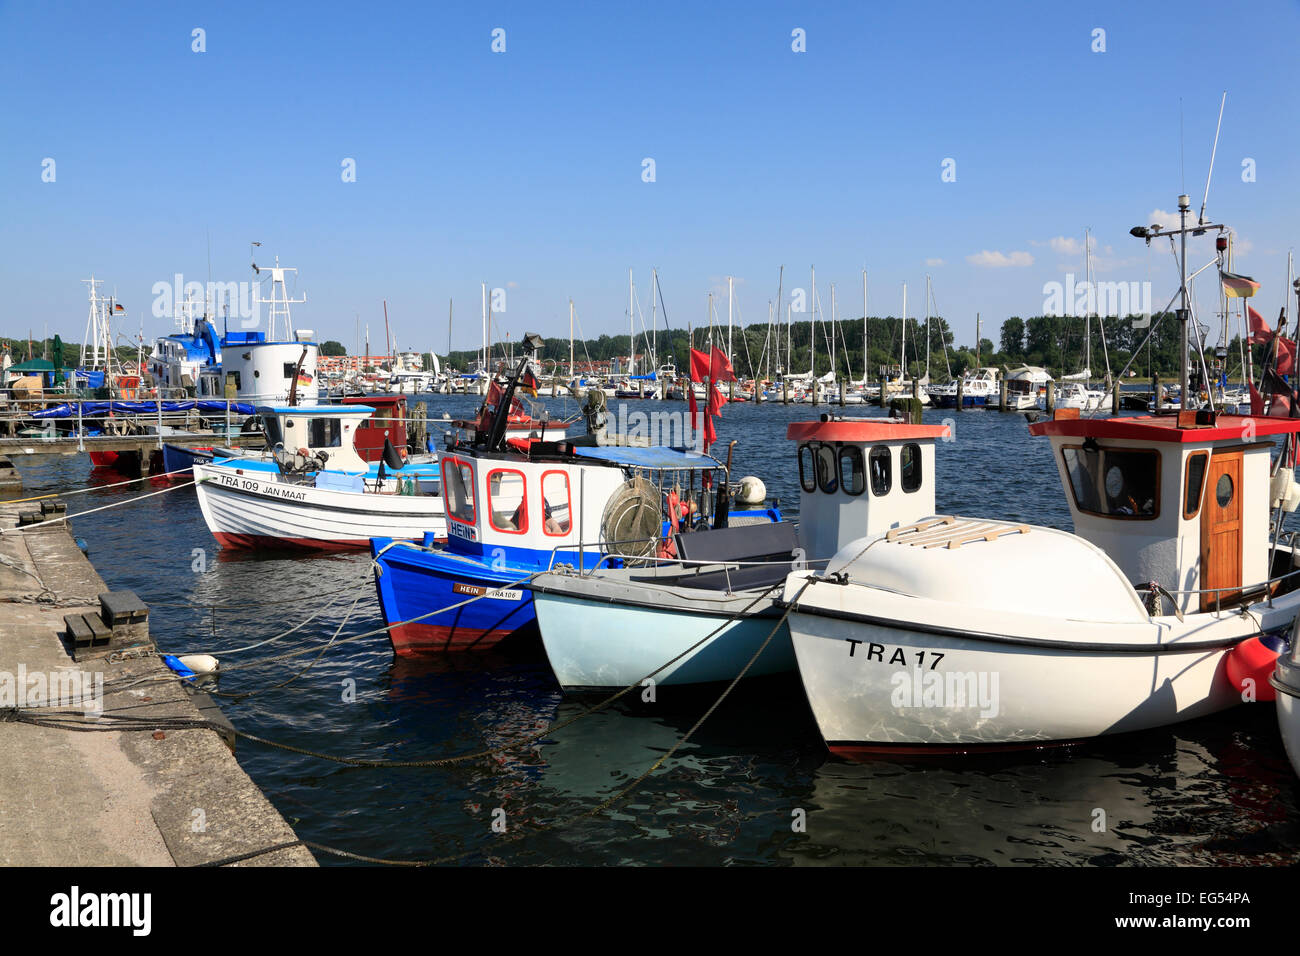 Fishing boats in the harbour, Travemuende, Baltic Sea coast,  Schleswig-Holstein,Germany, Europe Stock Photo